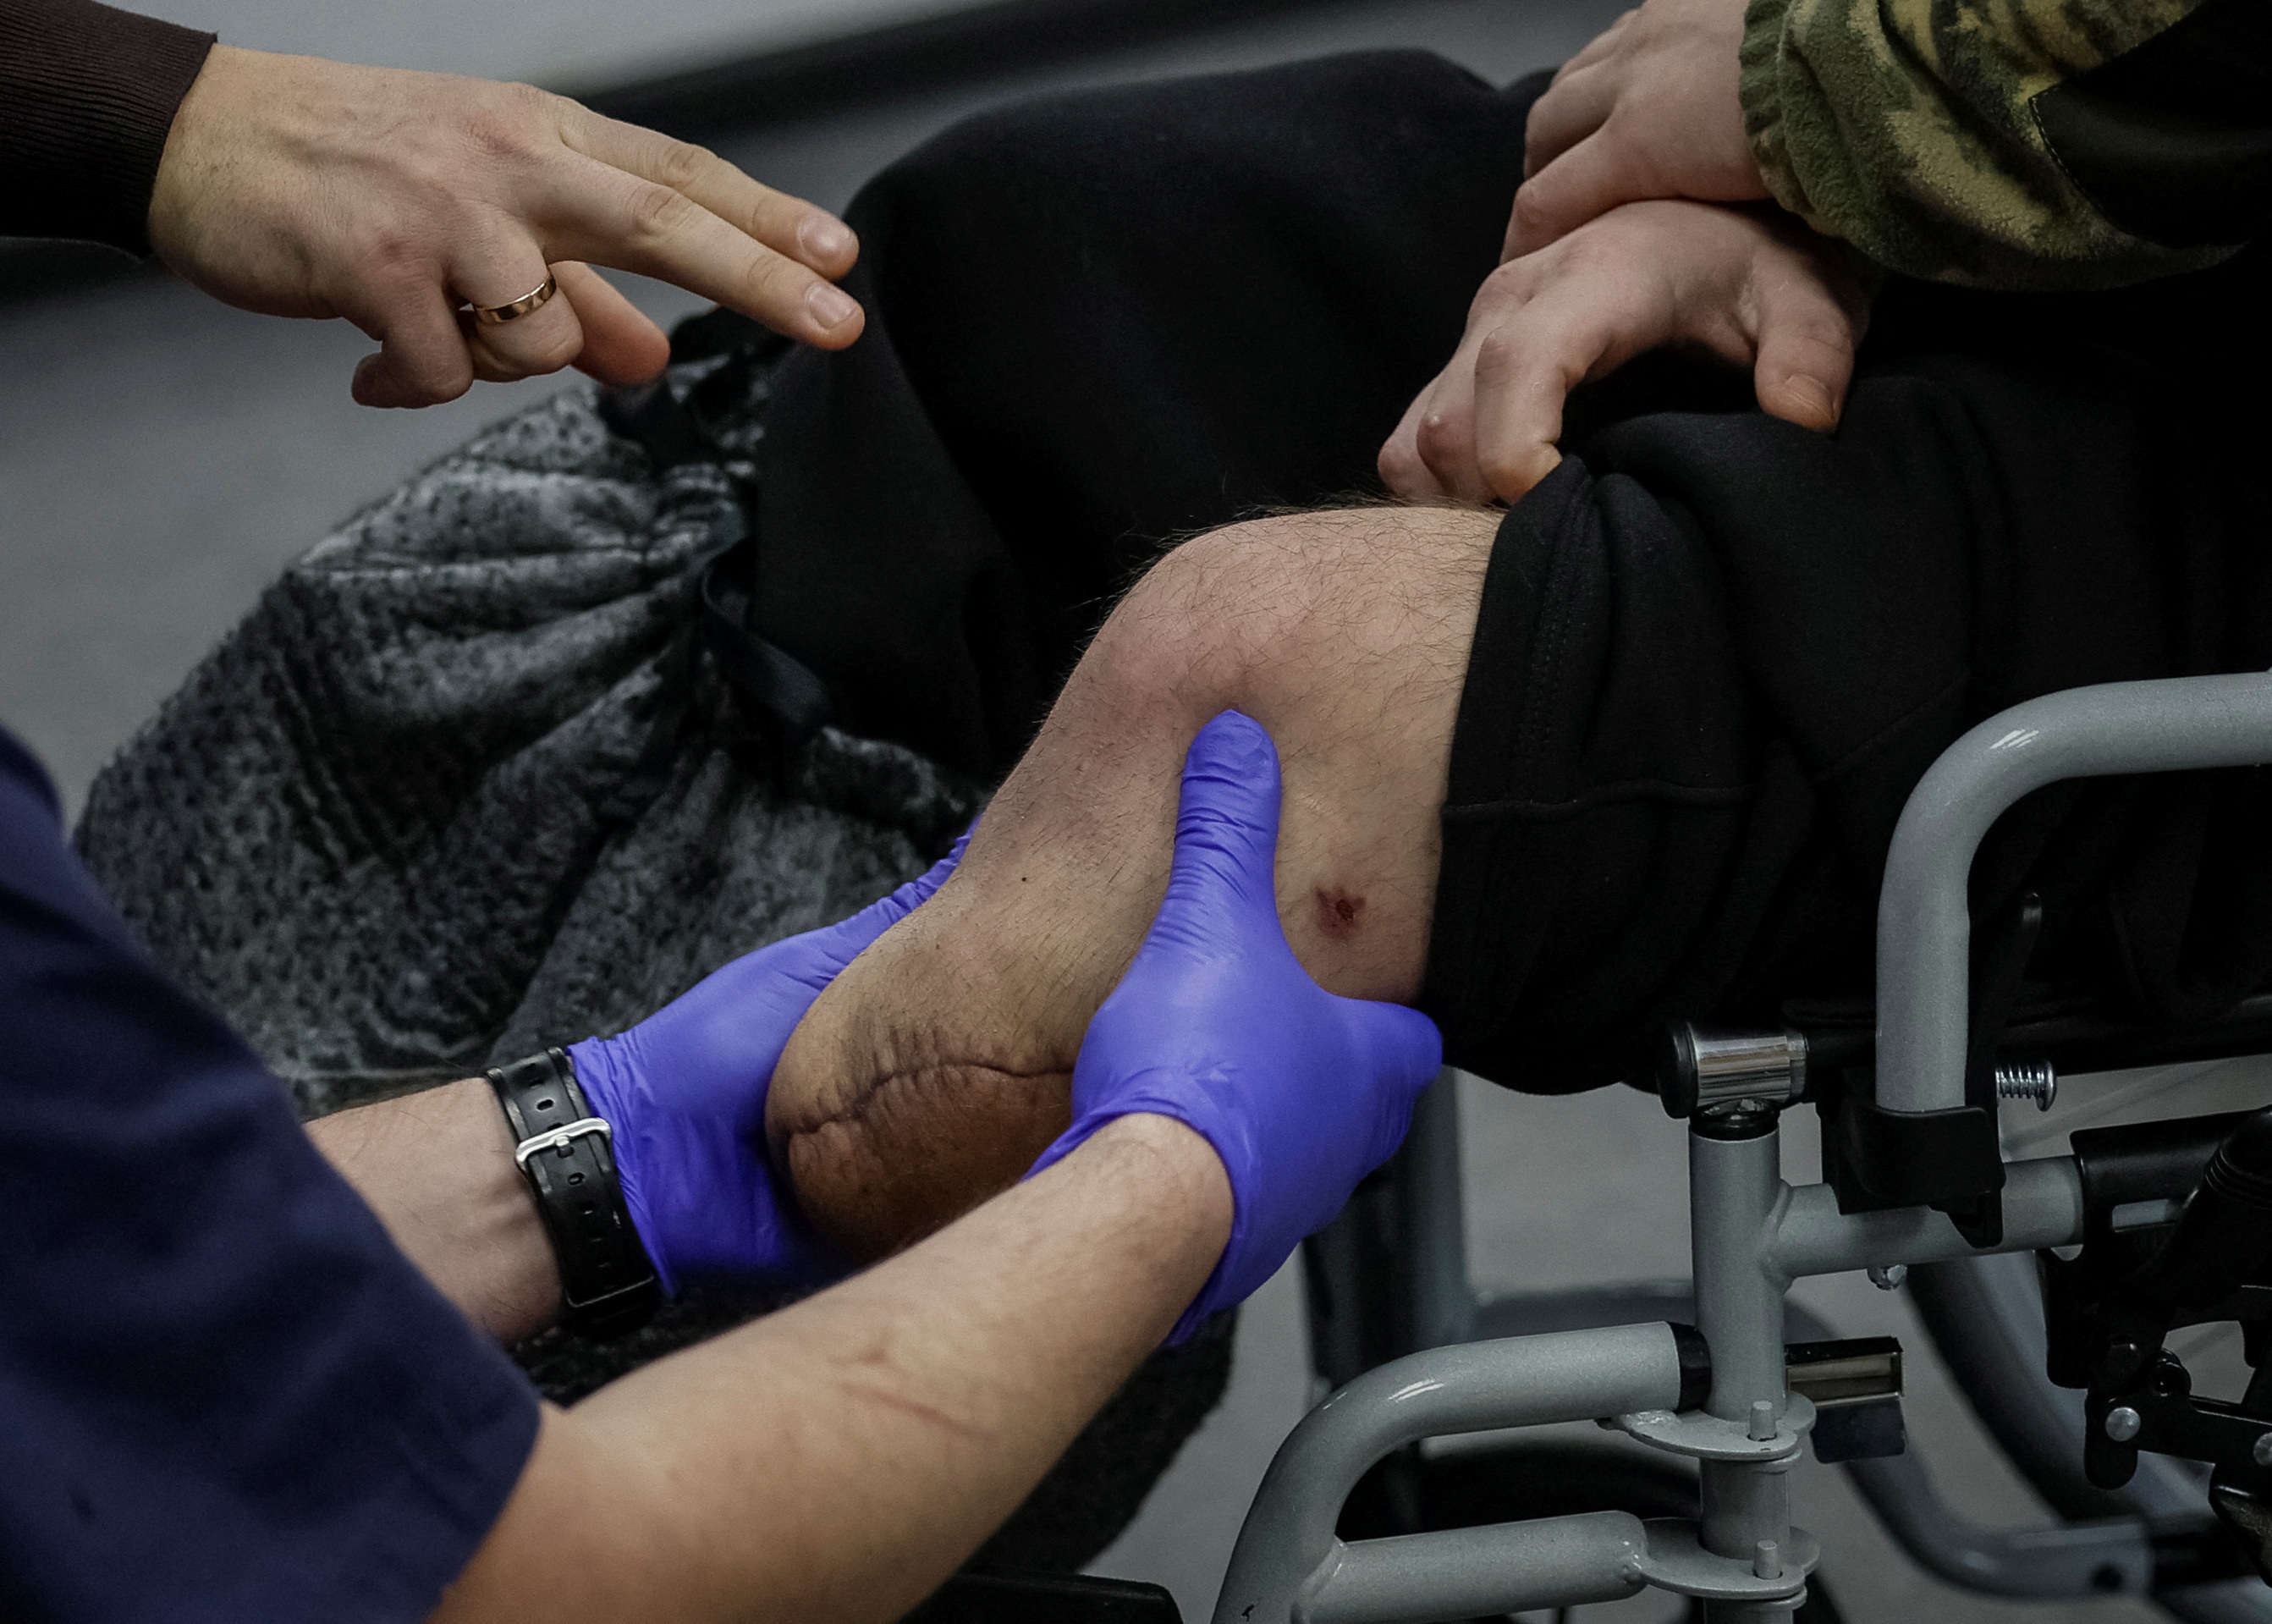 A worker of a prosthetics clinic examines an amputated limb of Denys, a soldier, who lost his leg at the war, on an appointment in the clinic in Kyiv